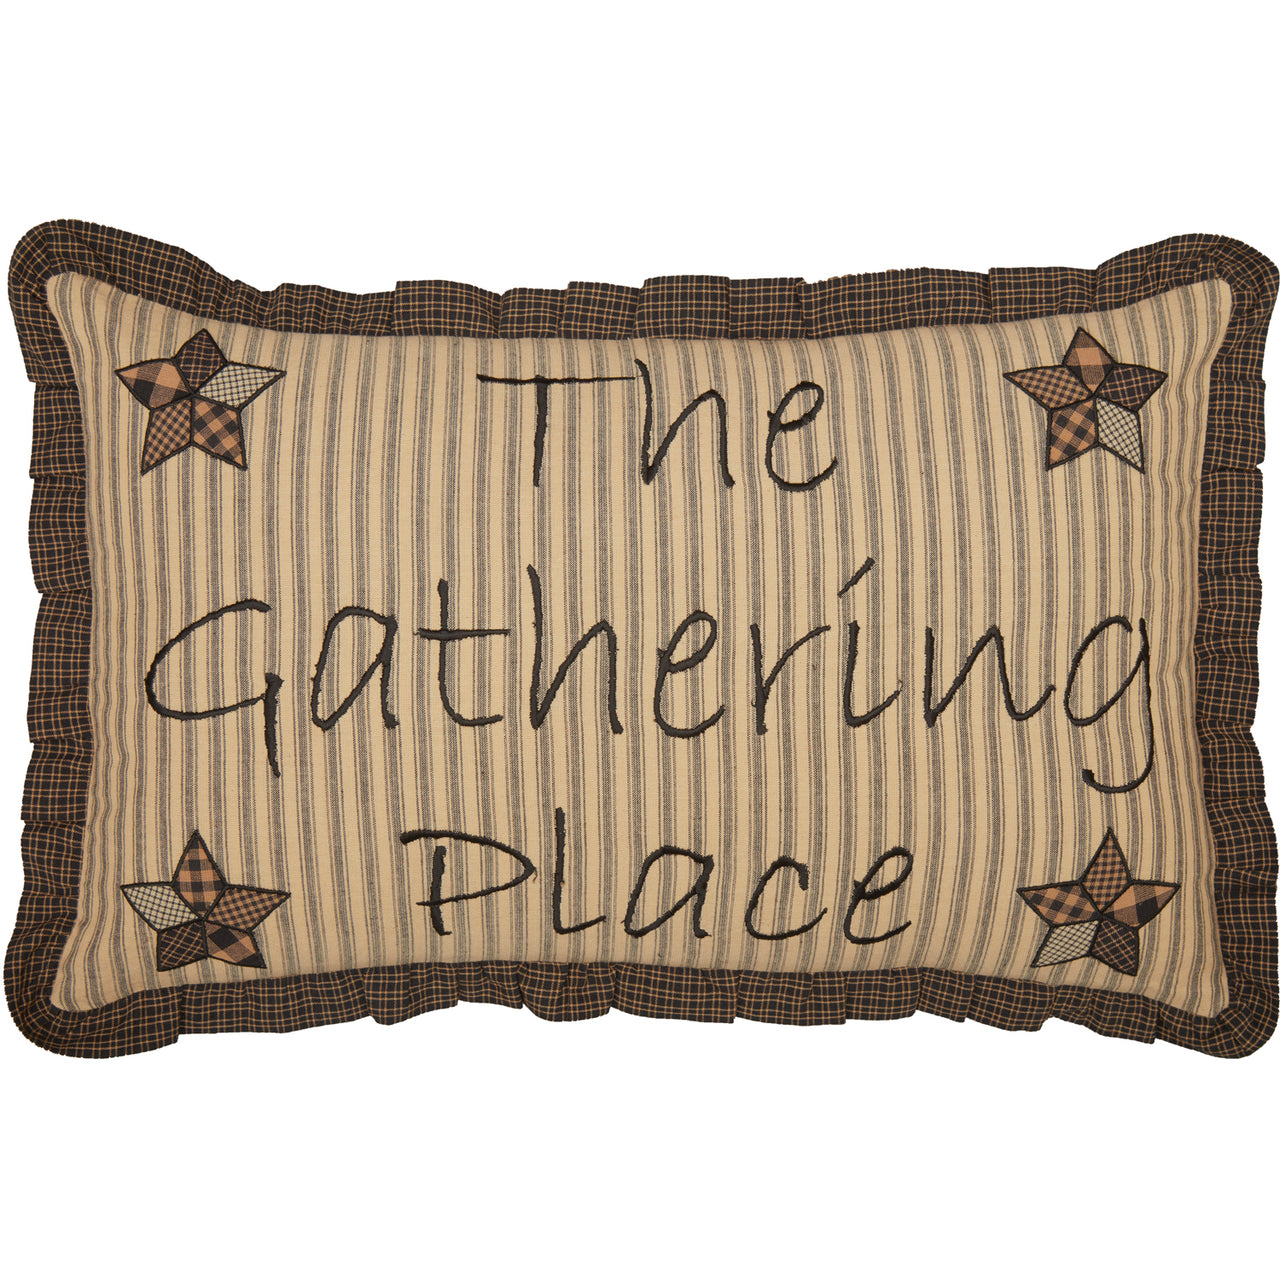 Farmhouse Star Gathering Place Pillow 14x22 VHC Brands